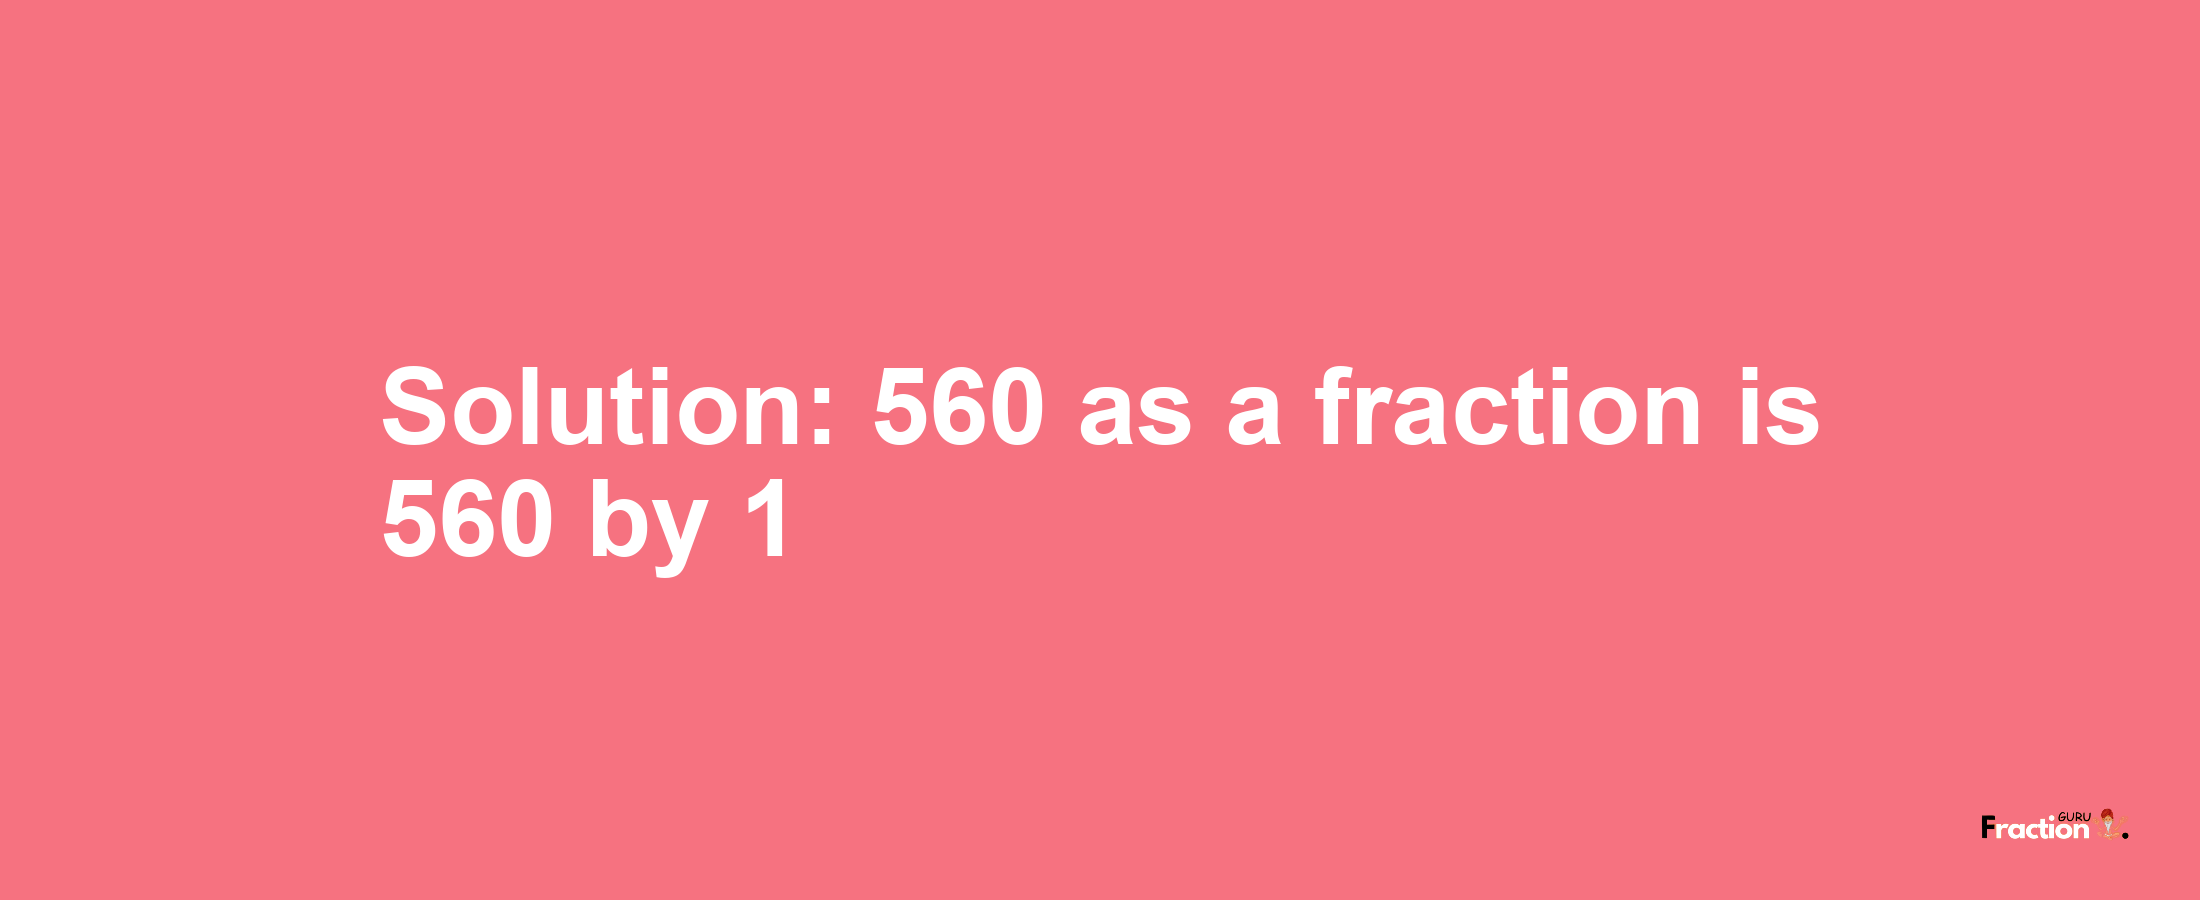 Solution:560 as a fraction is 560/1